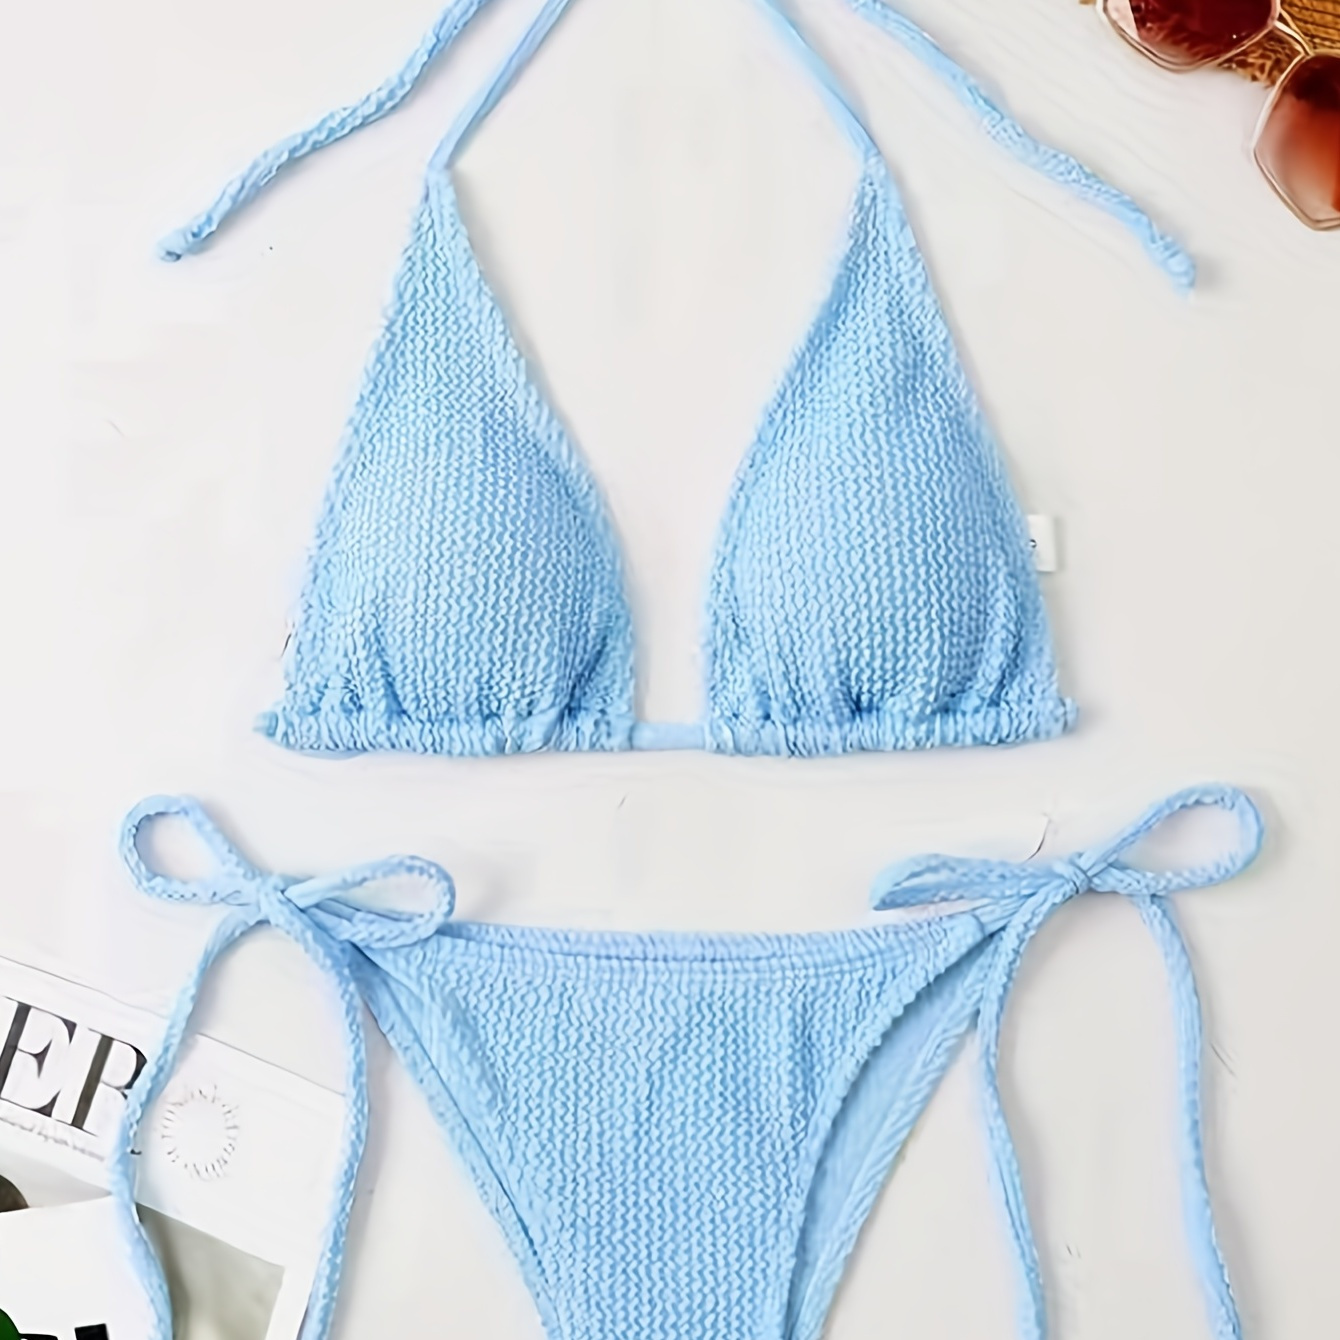 

Blue Embossed Striped Print Bikini Sets, Halter Neck V Neck Tie Back Tie Side High Cut 2 Pieces Swimsuit, Women's Swimwear & Clothing Triangle Top